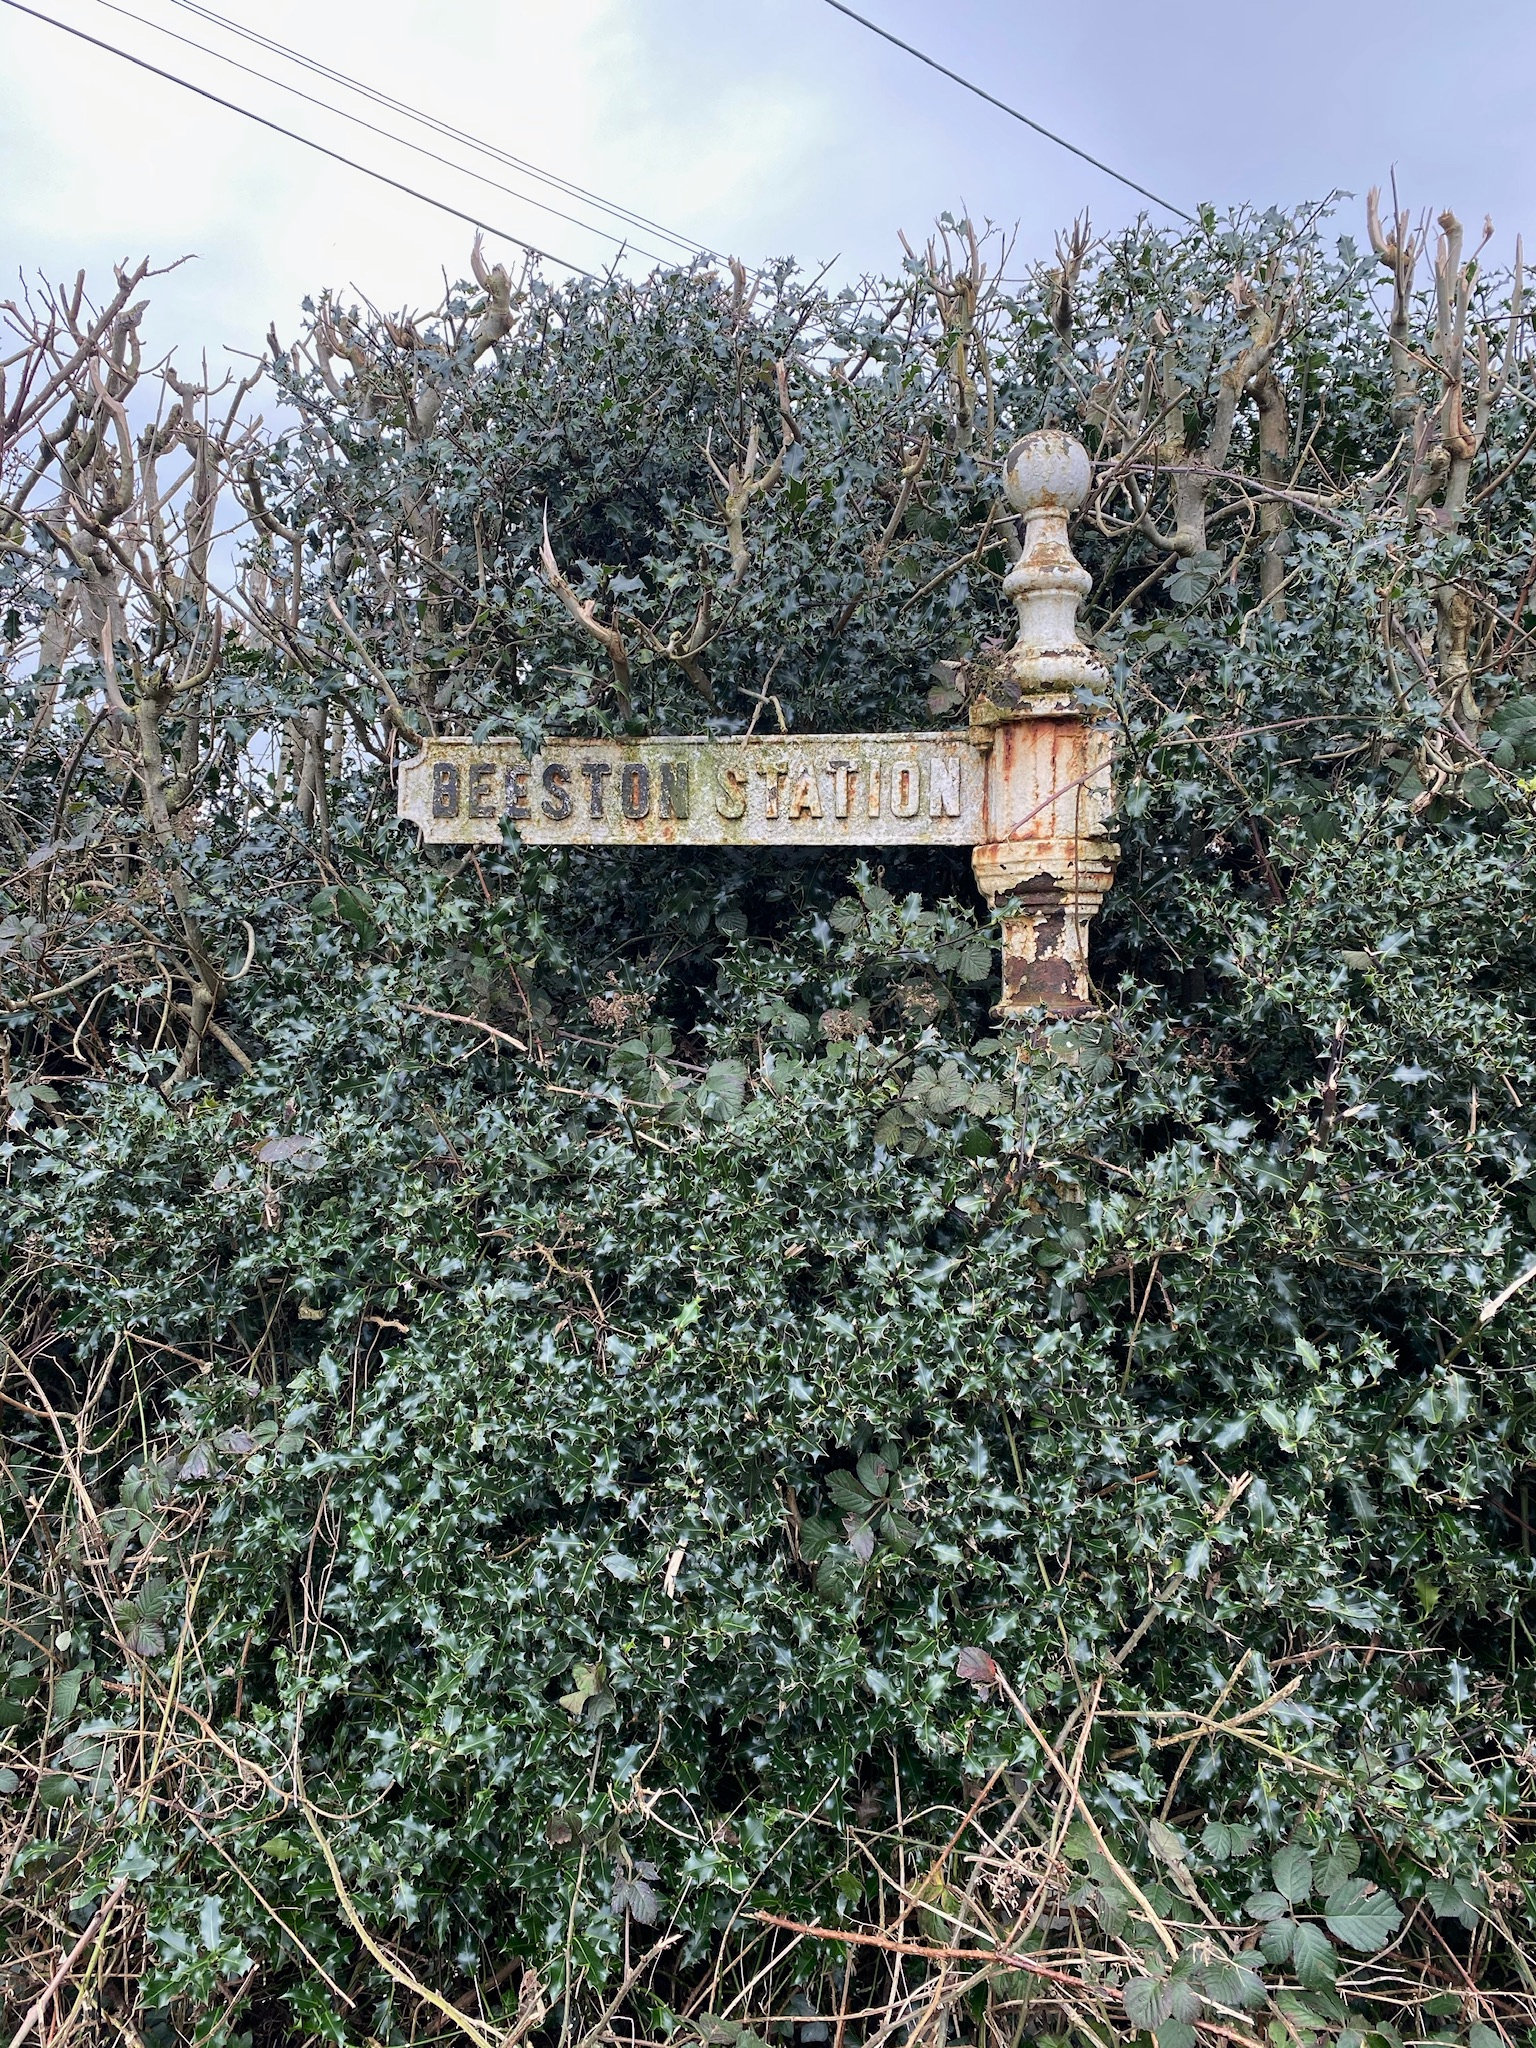 A sign for the former Beeston Station.